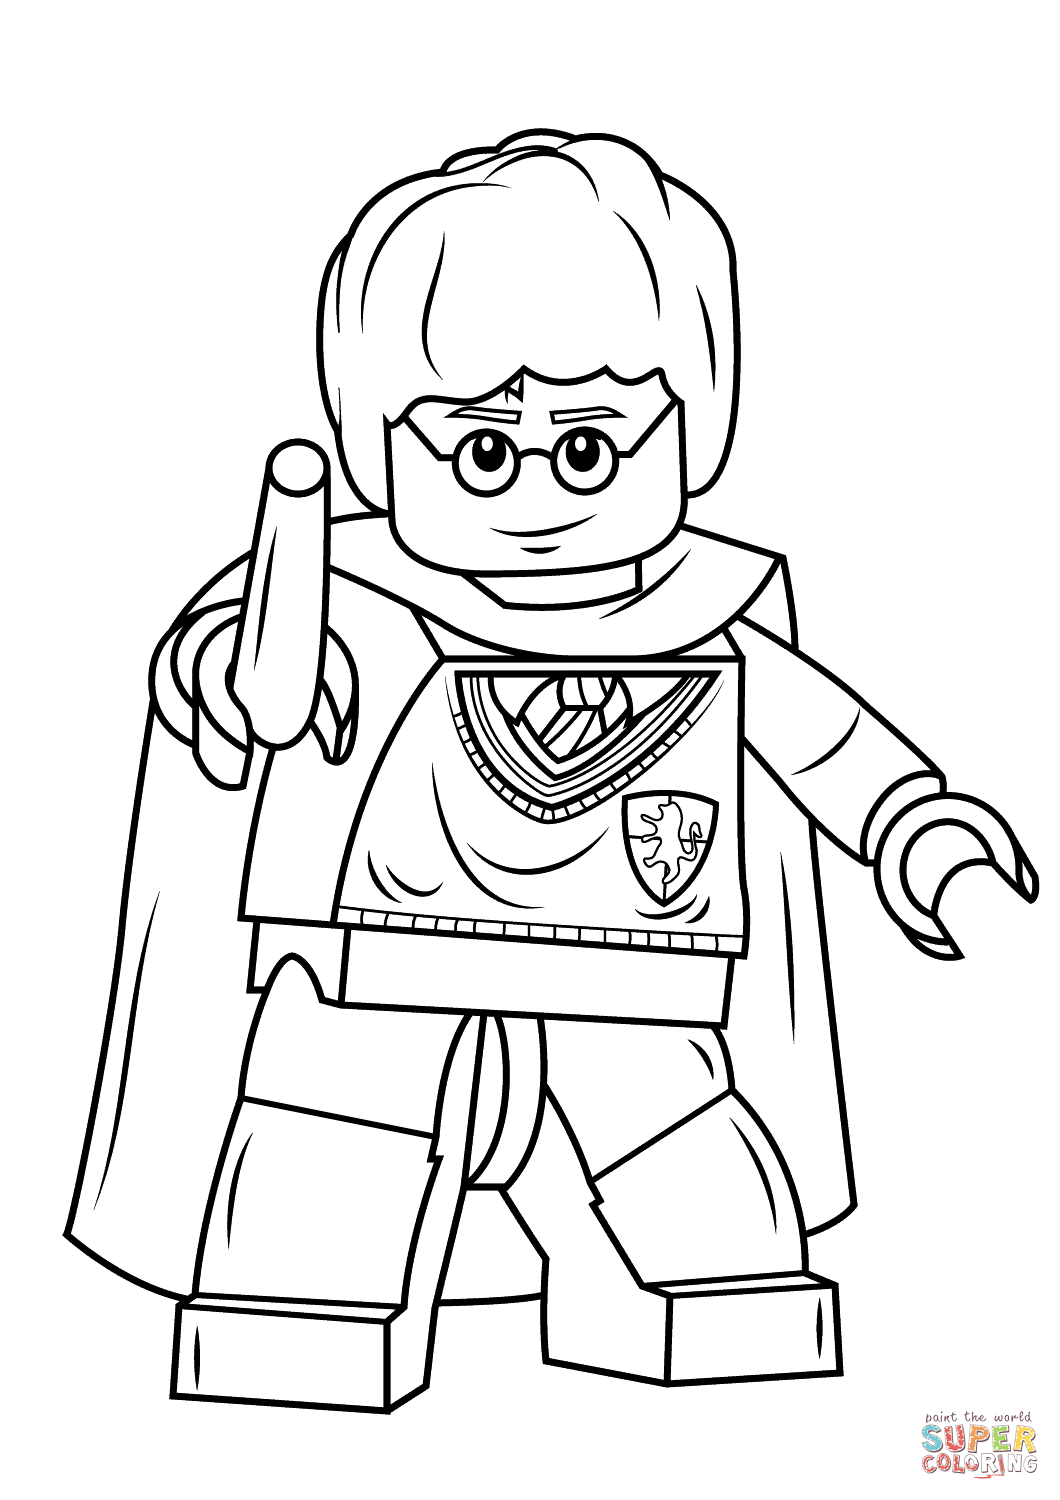 Lego Harry Potter with Wand coloring page | Free Printable ...